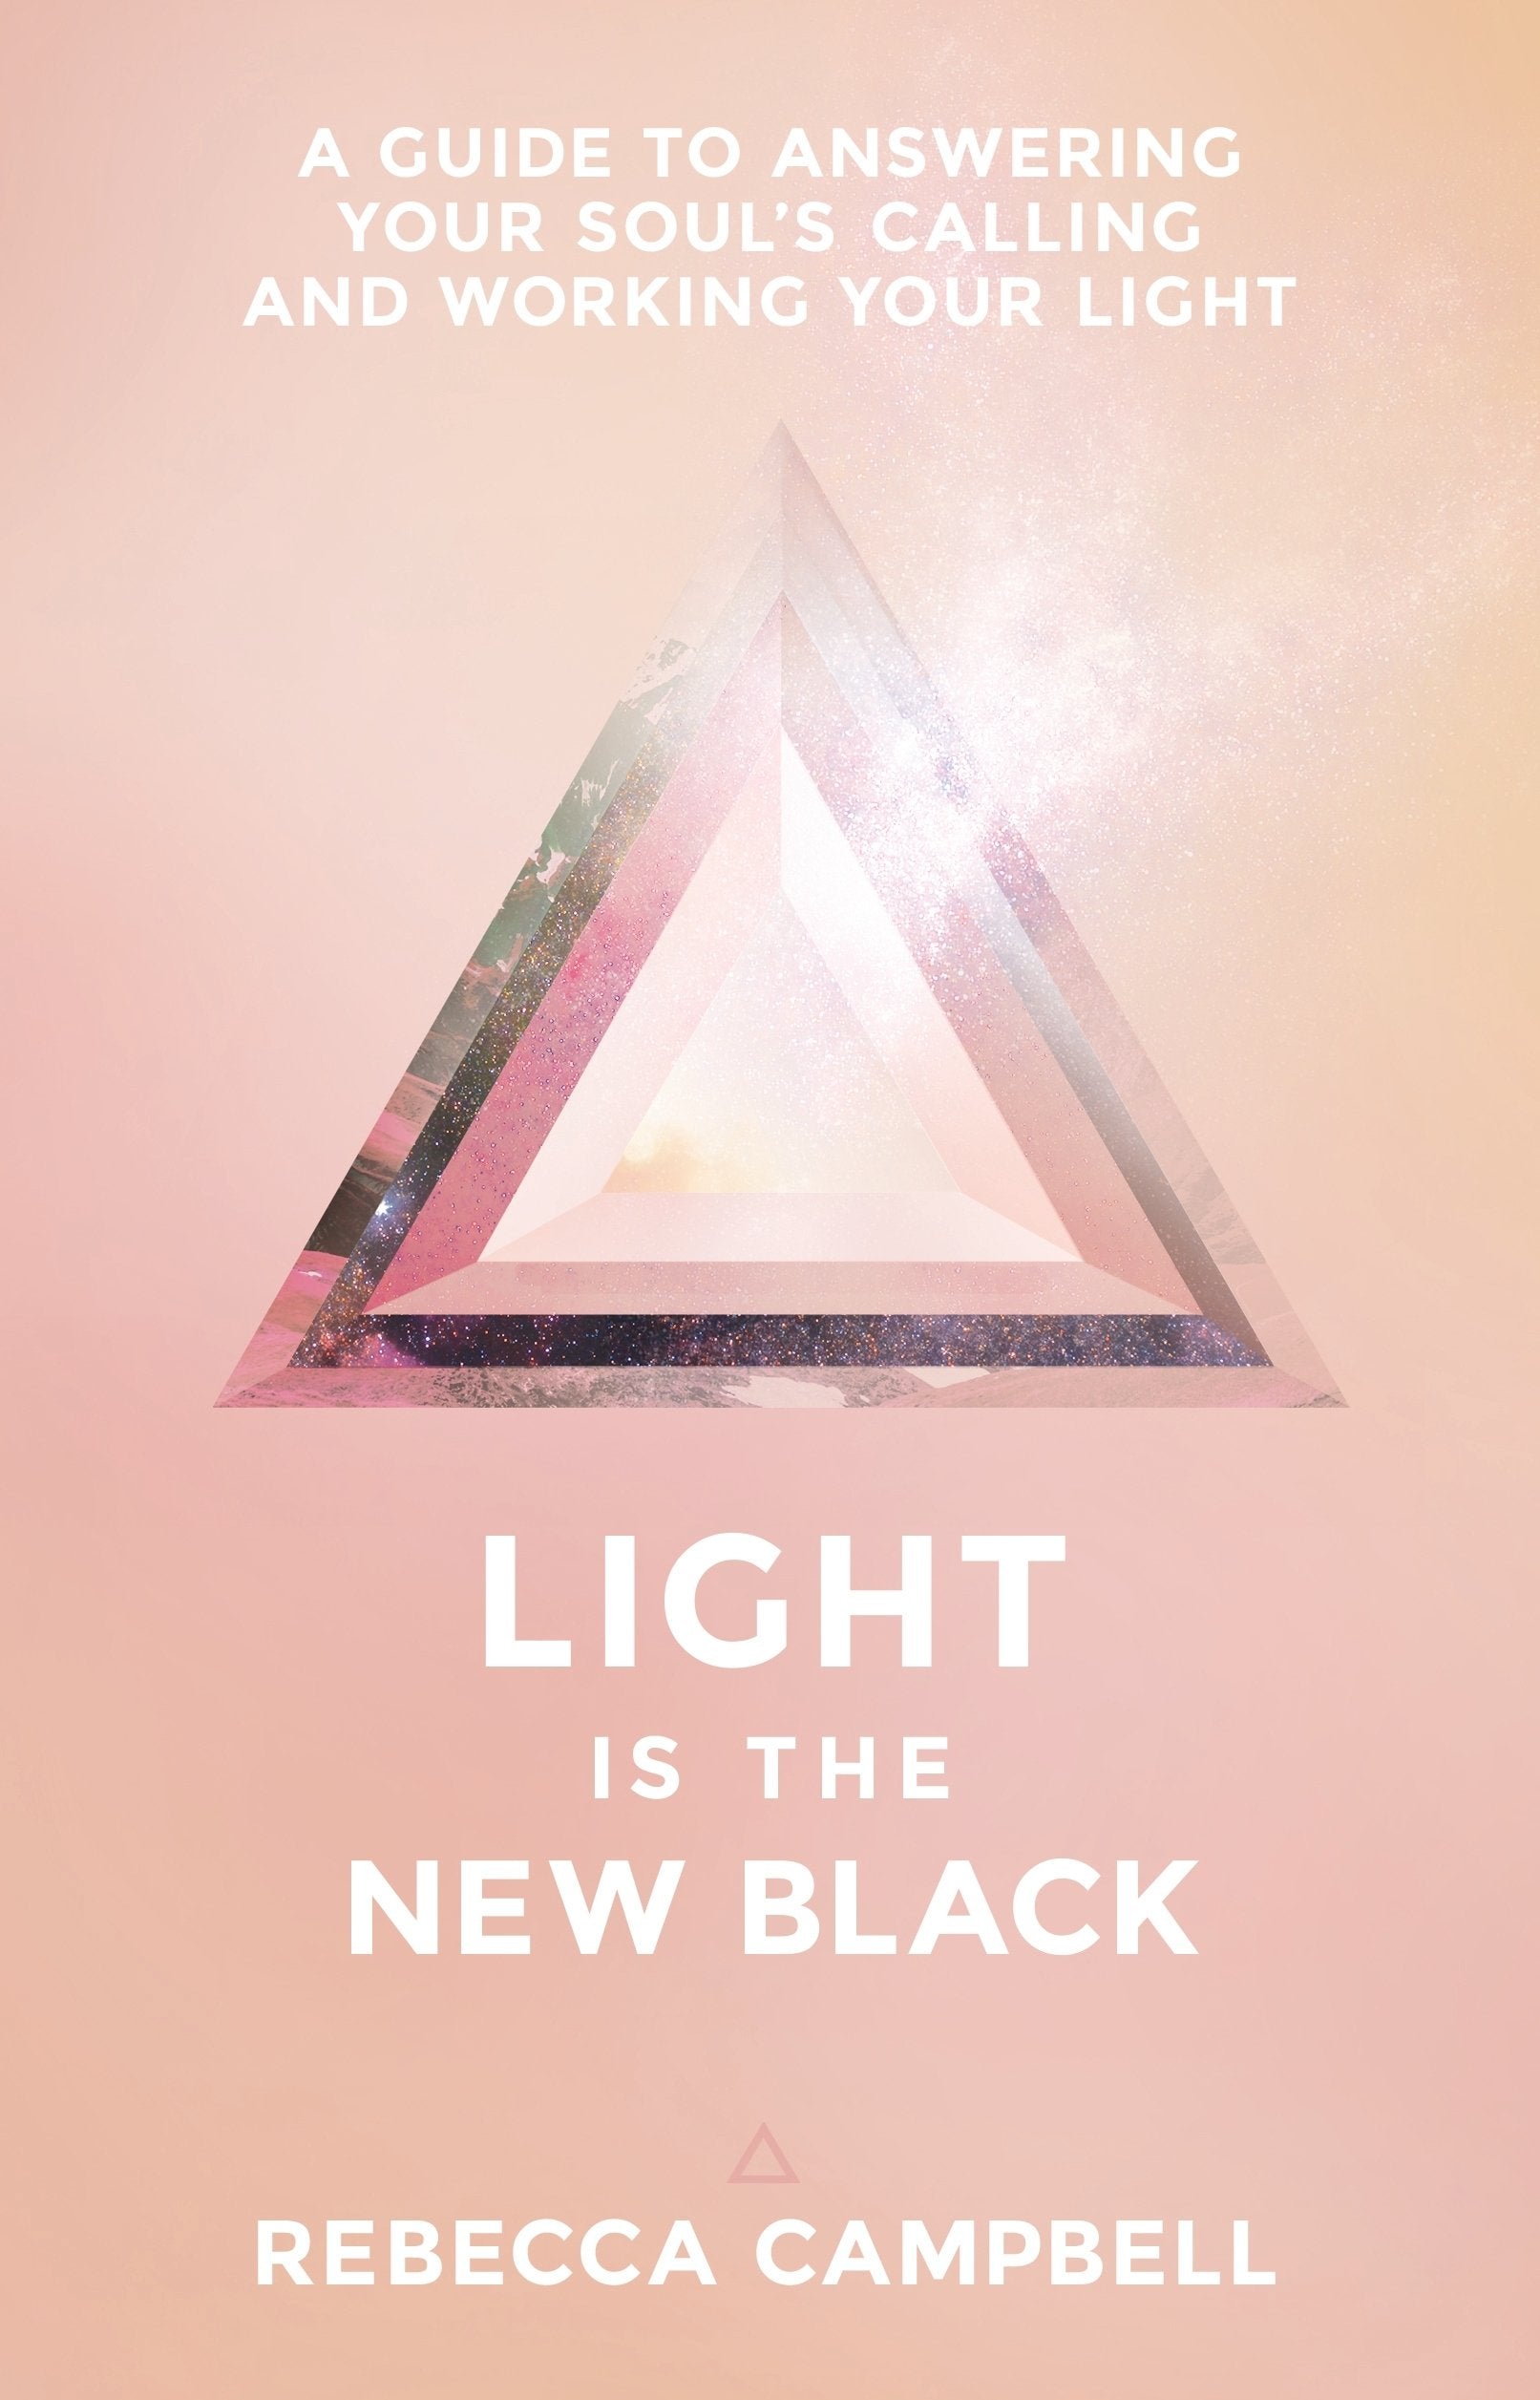 Light Is the New Black: A Guide to Answering Your Soul's Callings and Working Your Light || Rebecca Campbell (Paperback)